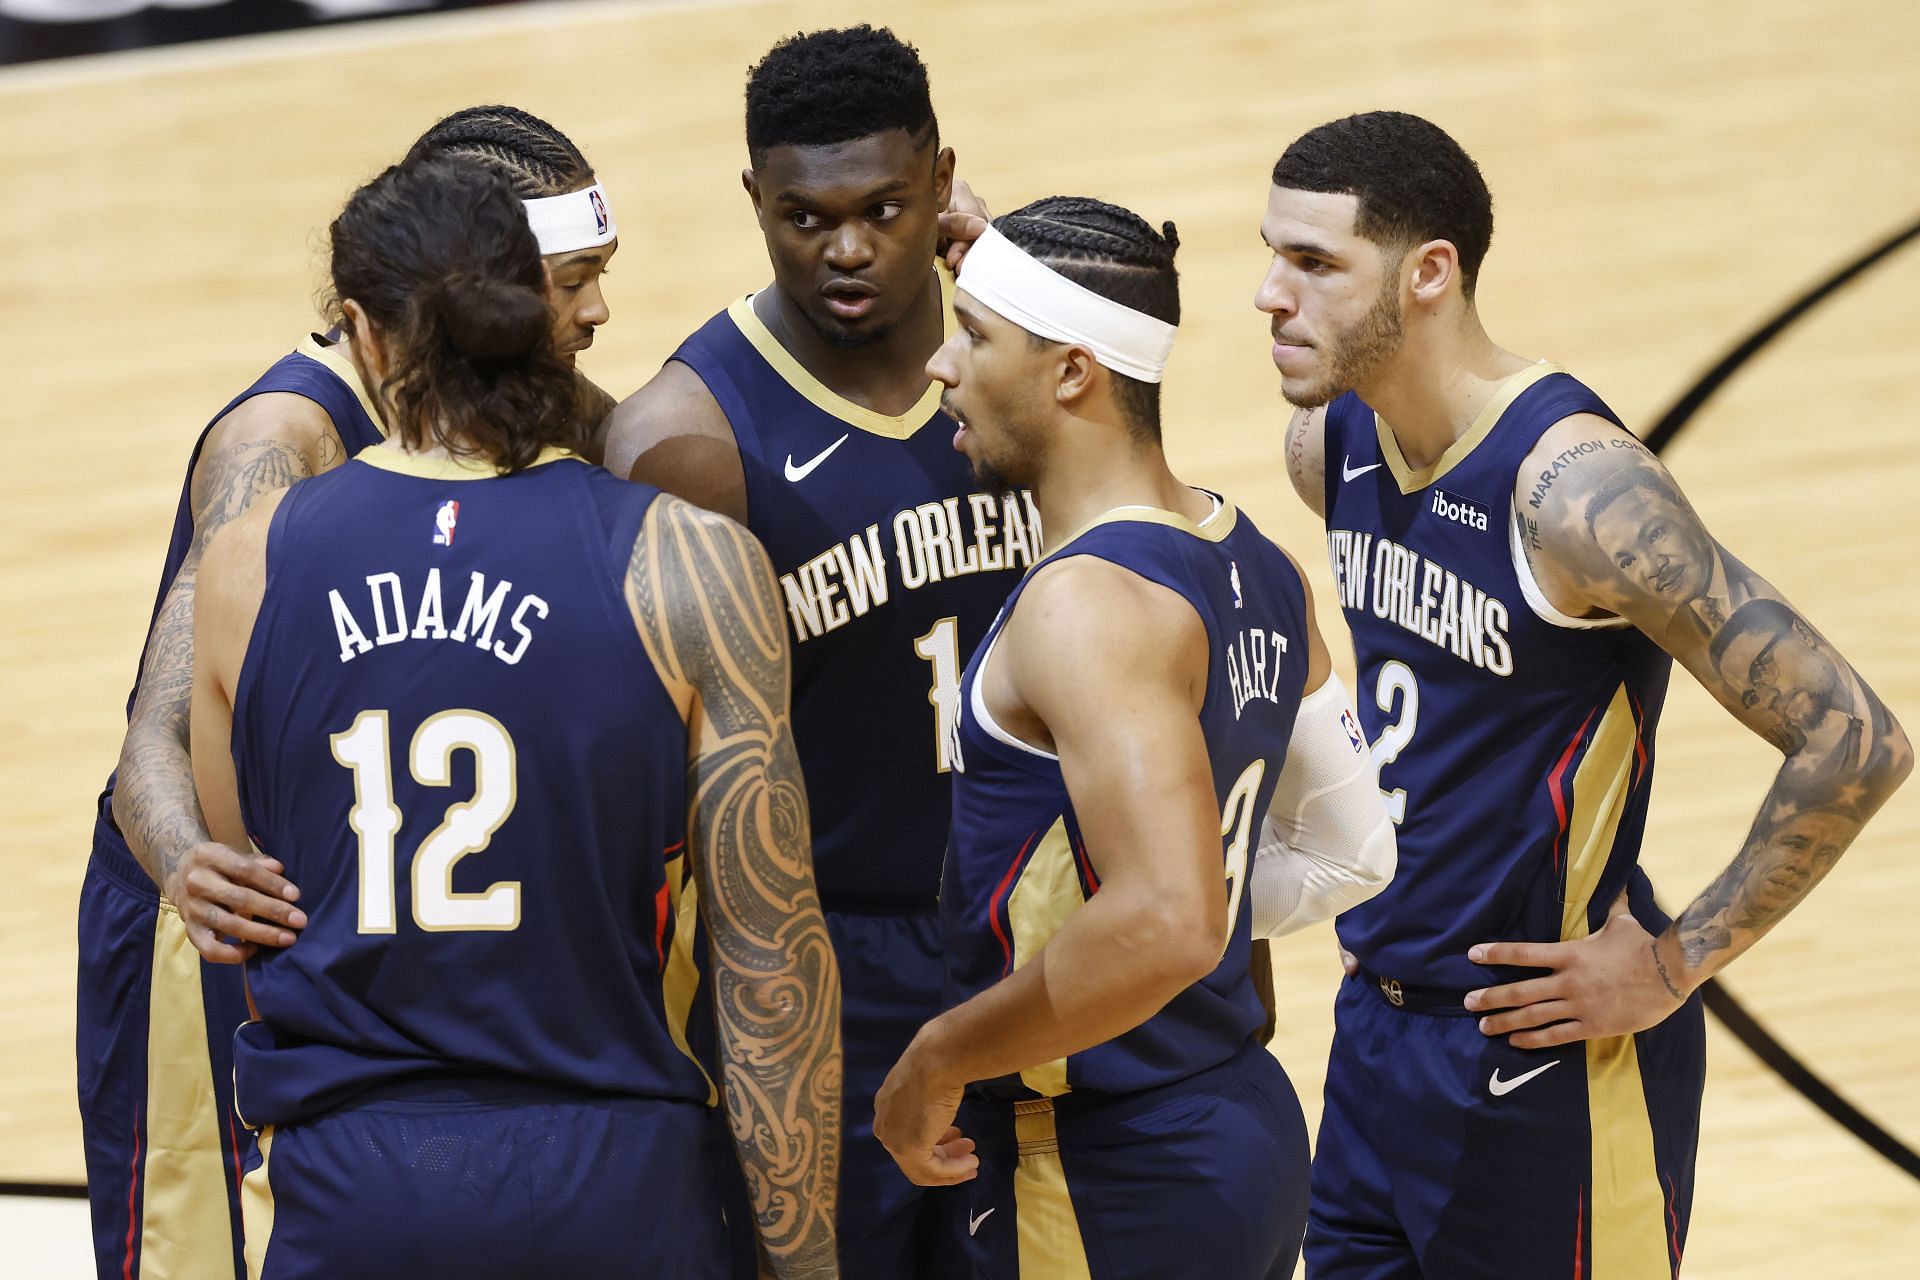 Steven Adams #12, Brandon Ingram #14, Zion Williamson #1, Josh Hart #3 and Lonzo Ball #2 of the New Orleans Pelicans huddle during the first quarter of a preseason game against the Miami Heat at American Airlines Arena on December 14, 2020 in Miami, Florida.